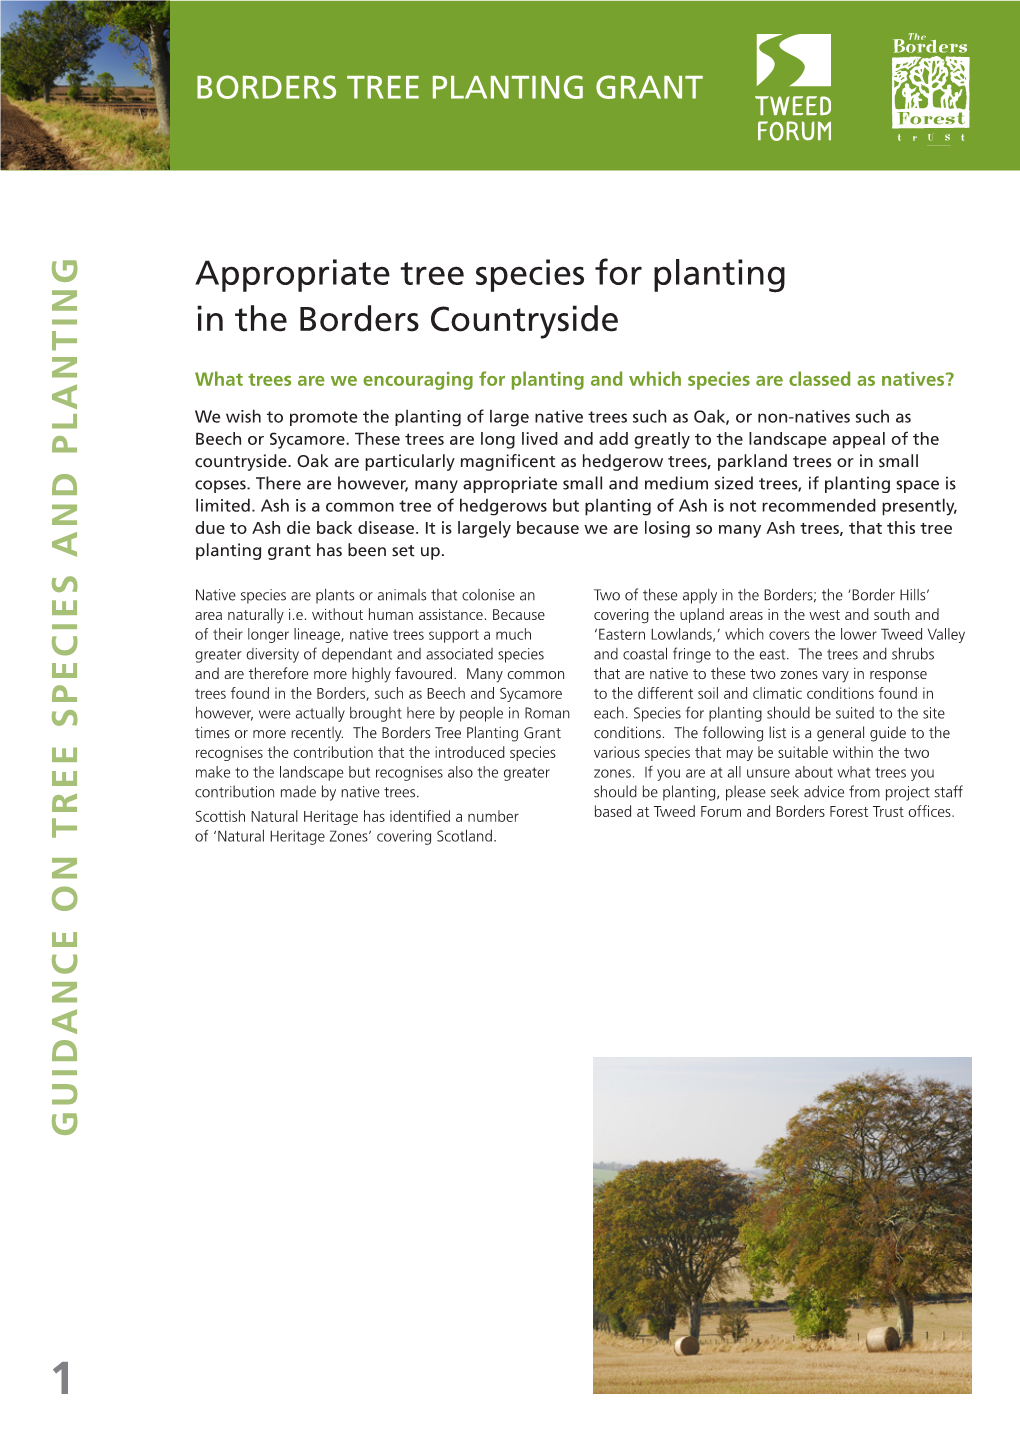 Guidance on Tree Species and Planting